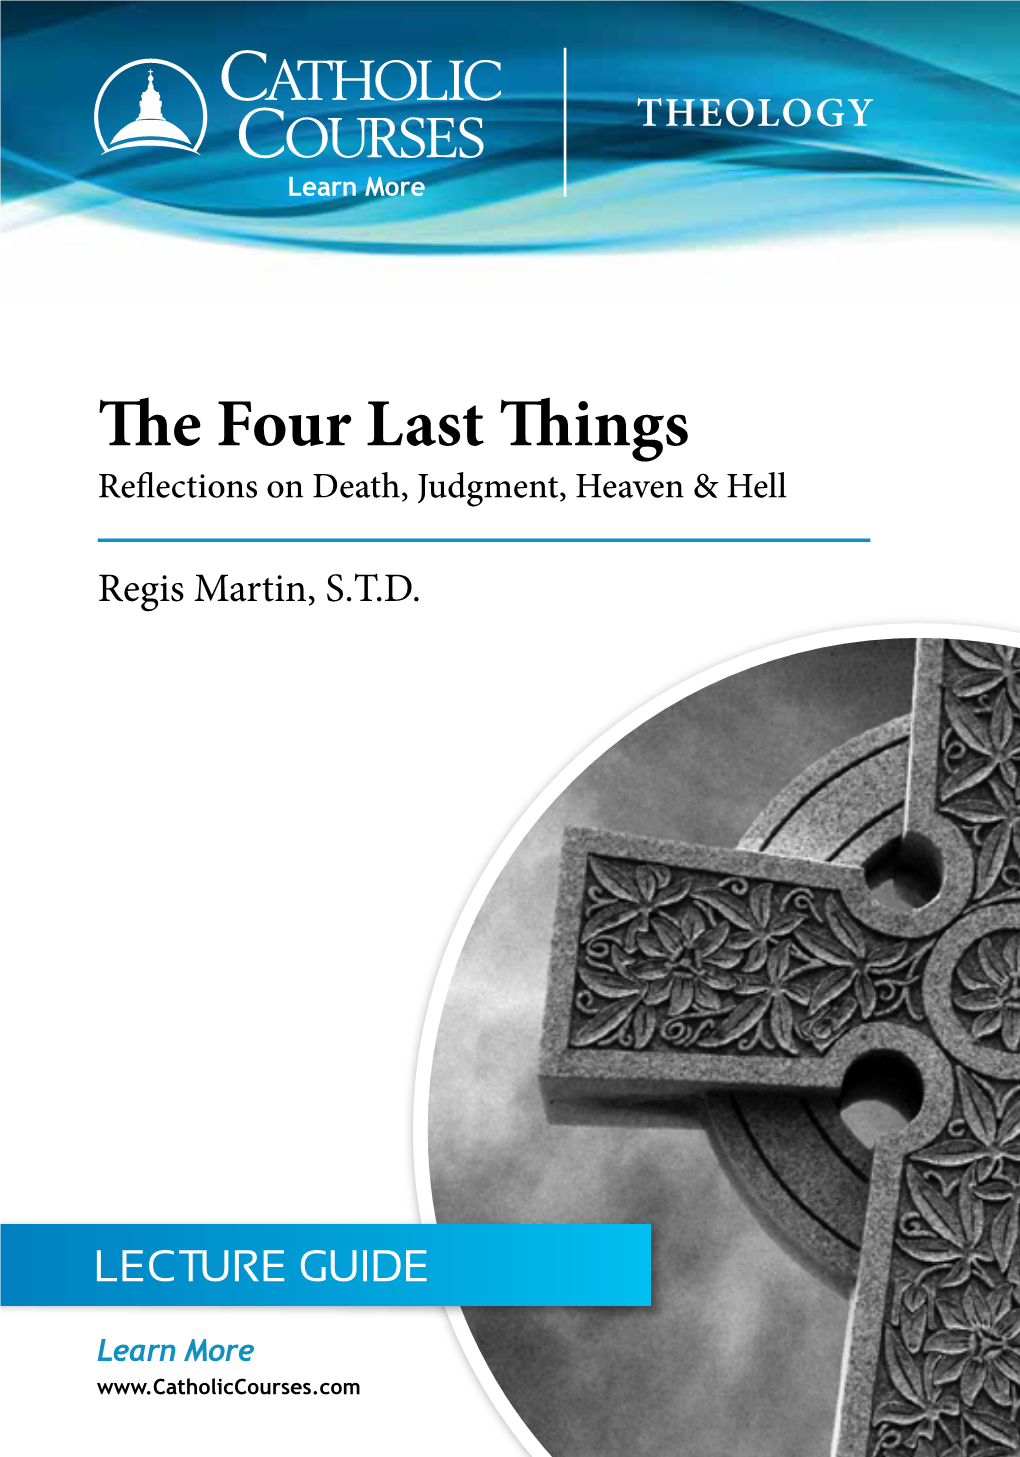 The Four Last Things Reflections on Death, Judgment, Heaven & Hell